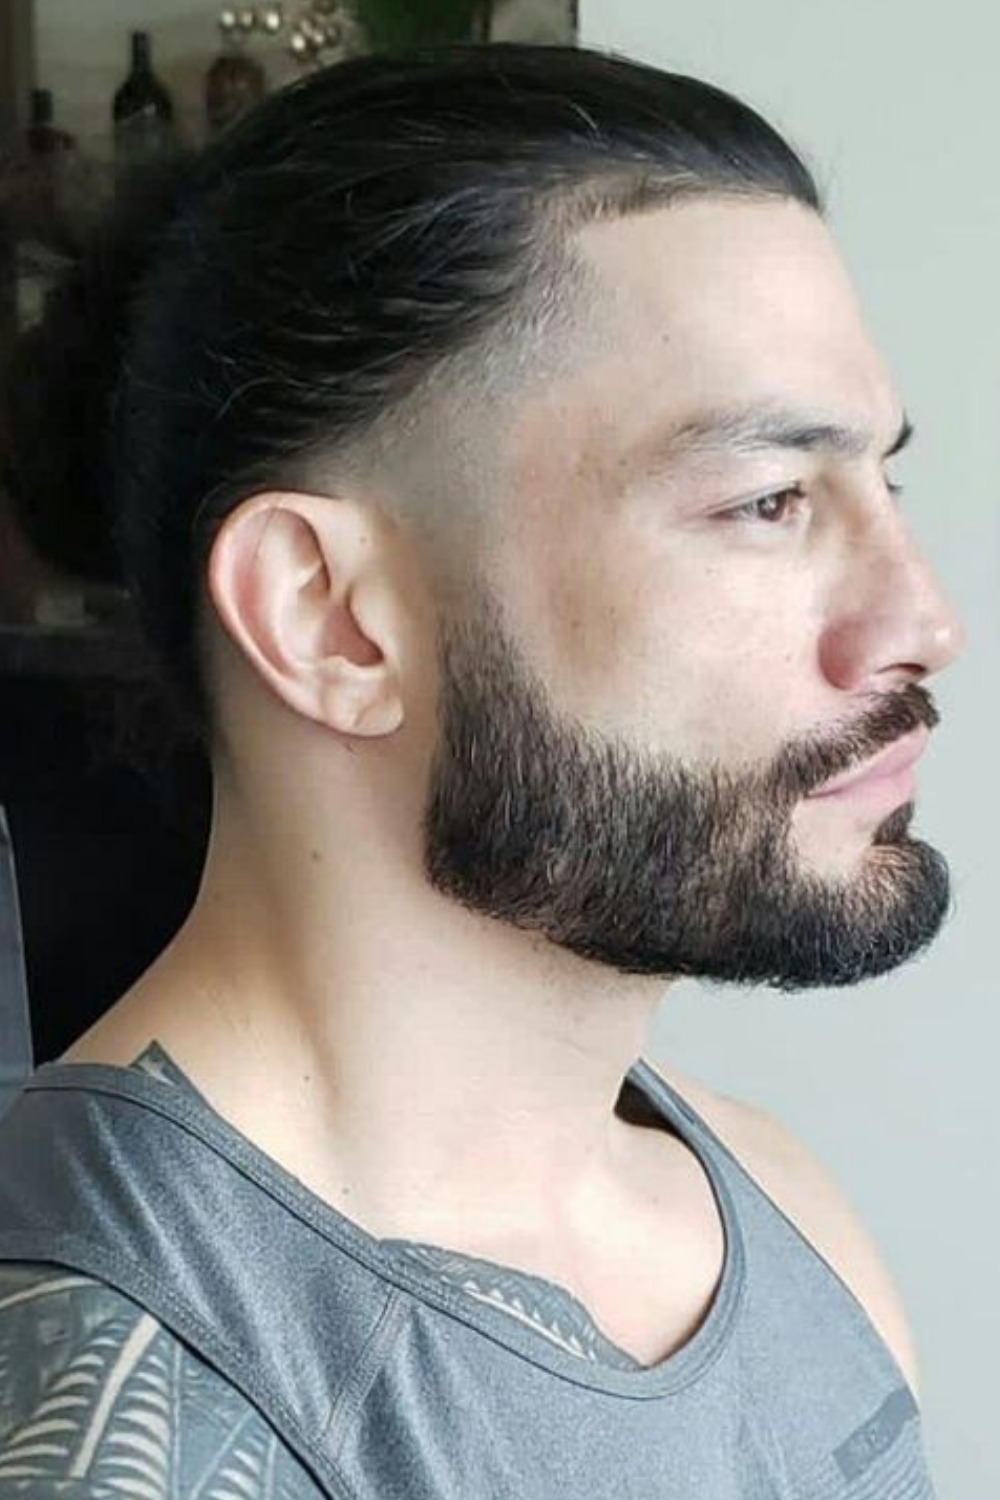 Pin by Roman Reigns on Roman Reigns best pic | Reign hairstyles, Roman  reigns shirtless, Roman reigns